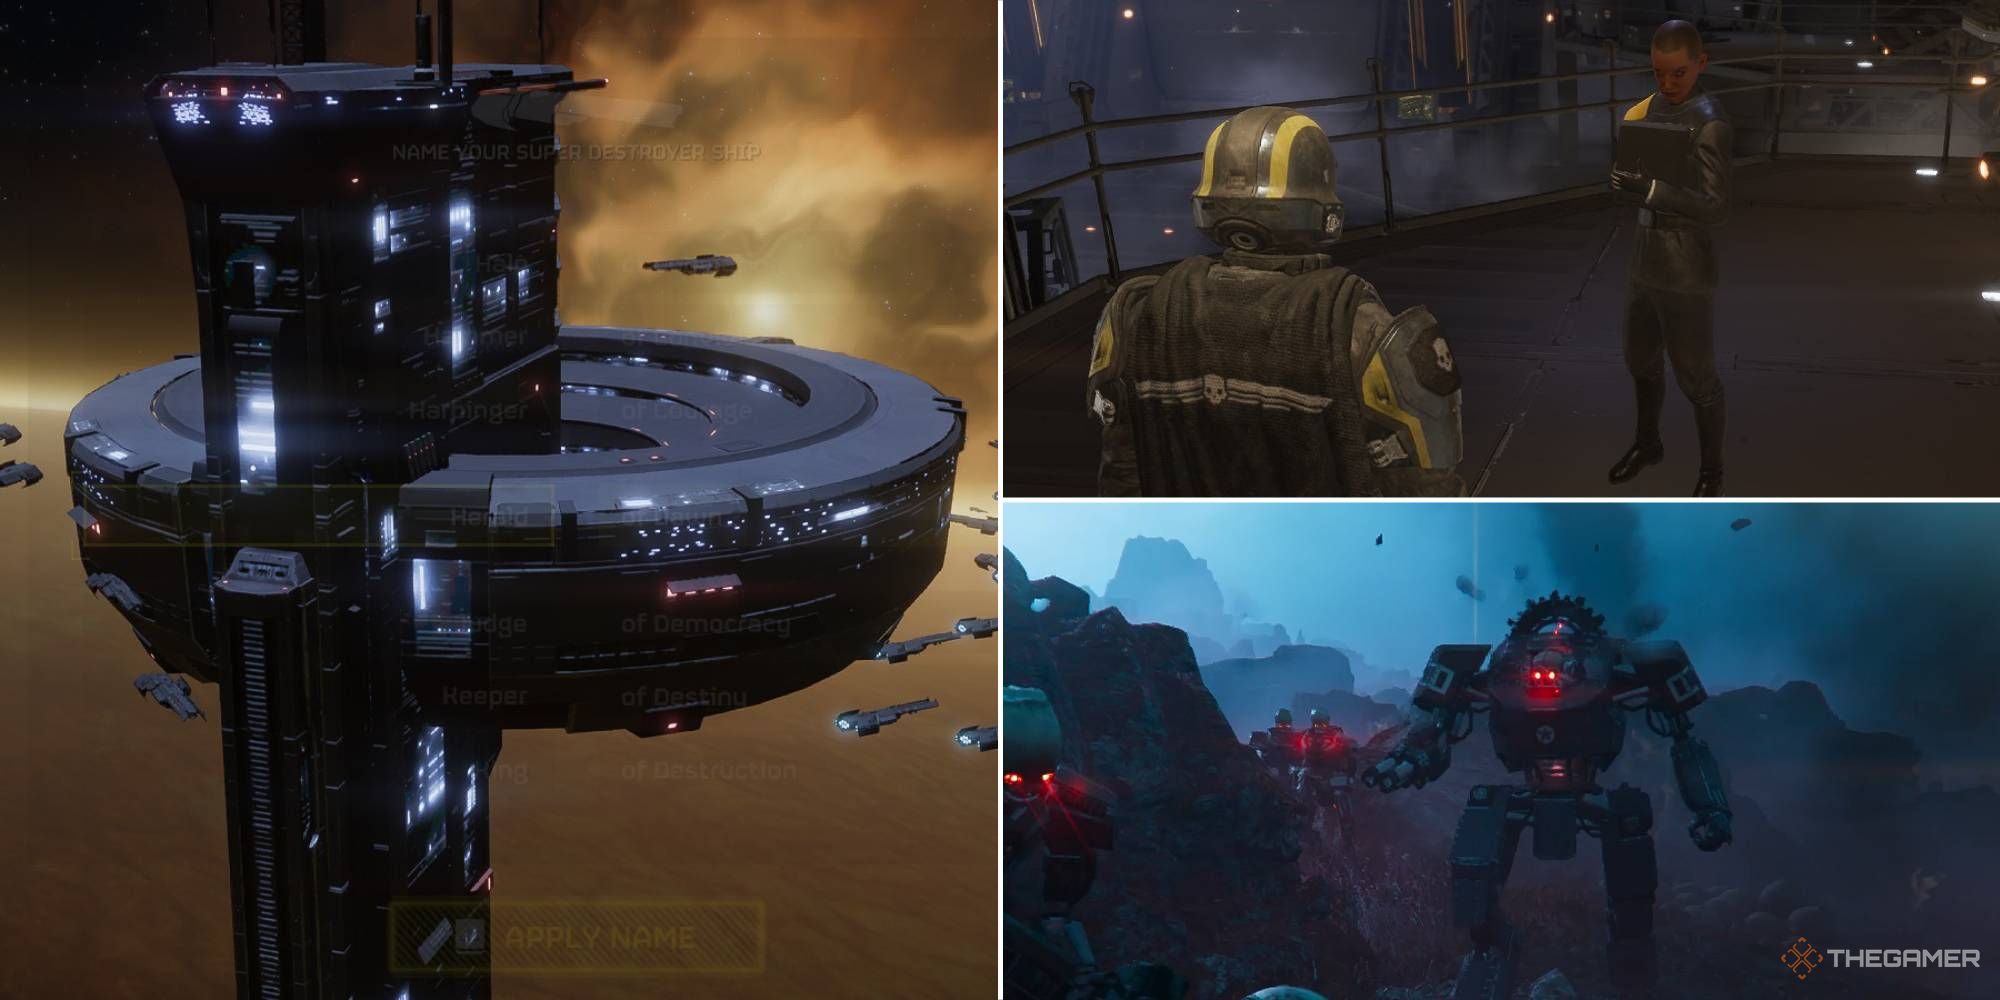 SEAF Command, the interior of a Super-Destroyer, and an army of Automatons in Helldivers2